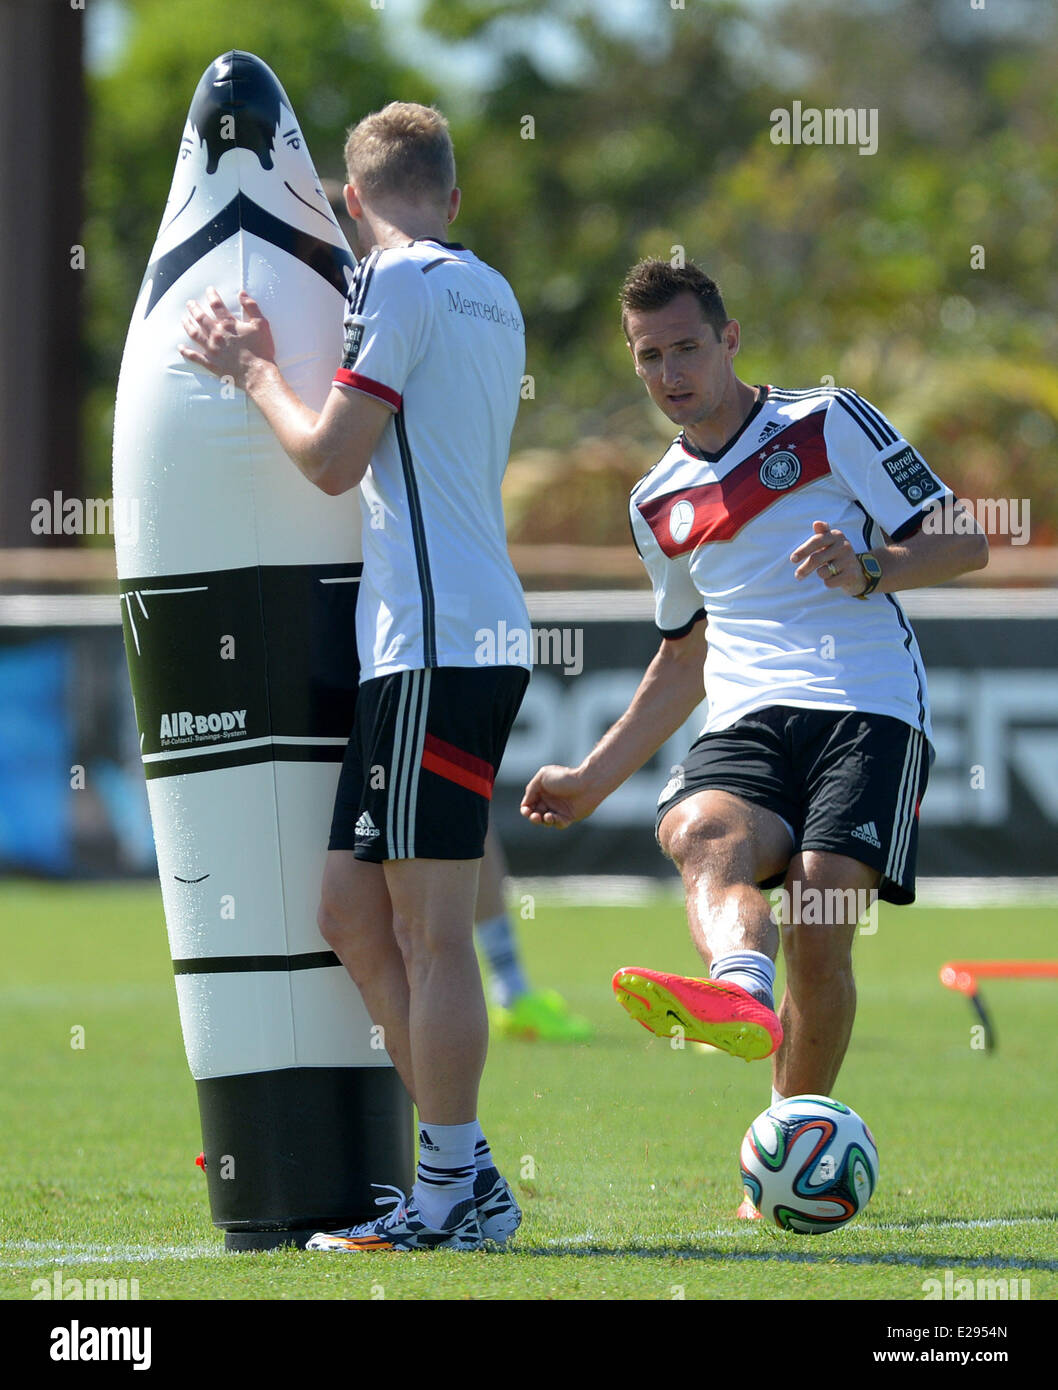 Santo Andre, Brazil. 17th June, 2014. Miroslav Klose (r) and Andre Schuerrle in action during a training session of the German national soccer team at the training center in Santo Andre, Brazil, 17 June 2014. The FIFA World Cup 2014 will take place in Brazil from 12 June to 13 July 2014. Photo: Thomas Eisenhuth/dpa/Alamy Live News Stock Photo